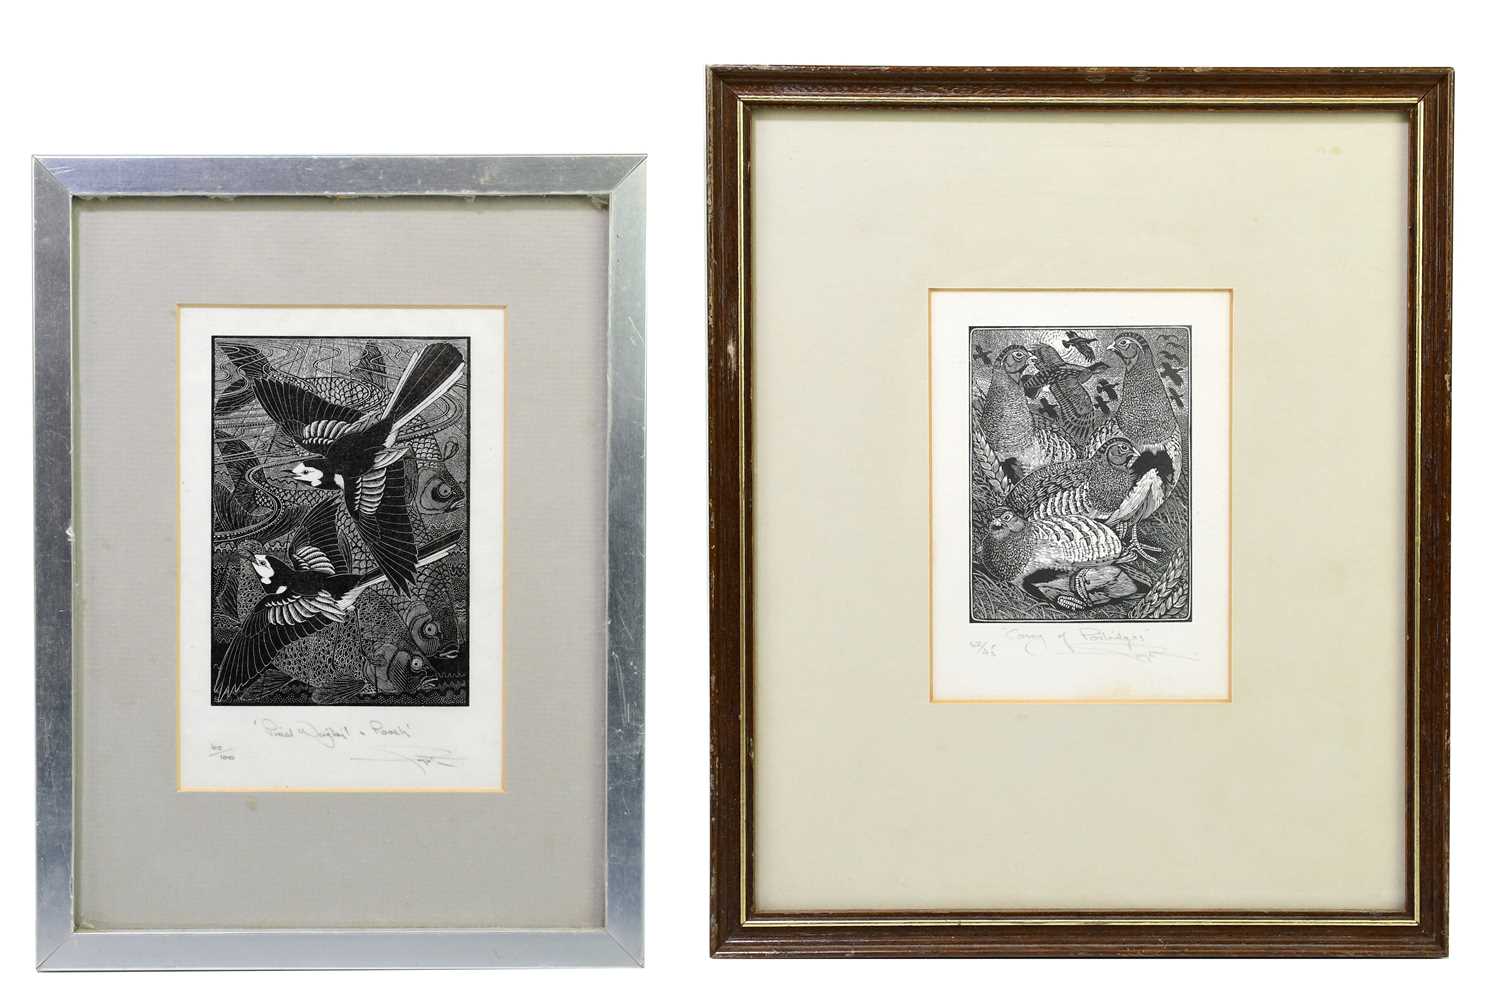 † COLIN SEE-PAYNTON (born 1946); two signed limited edition prints, 'Covey of Partridges' and '